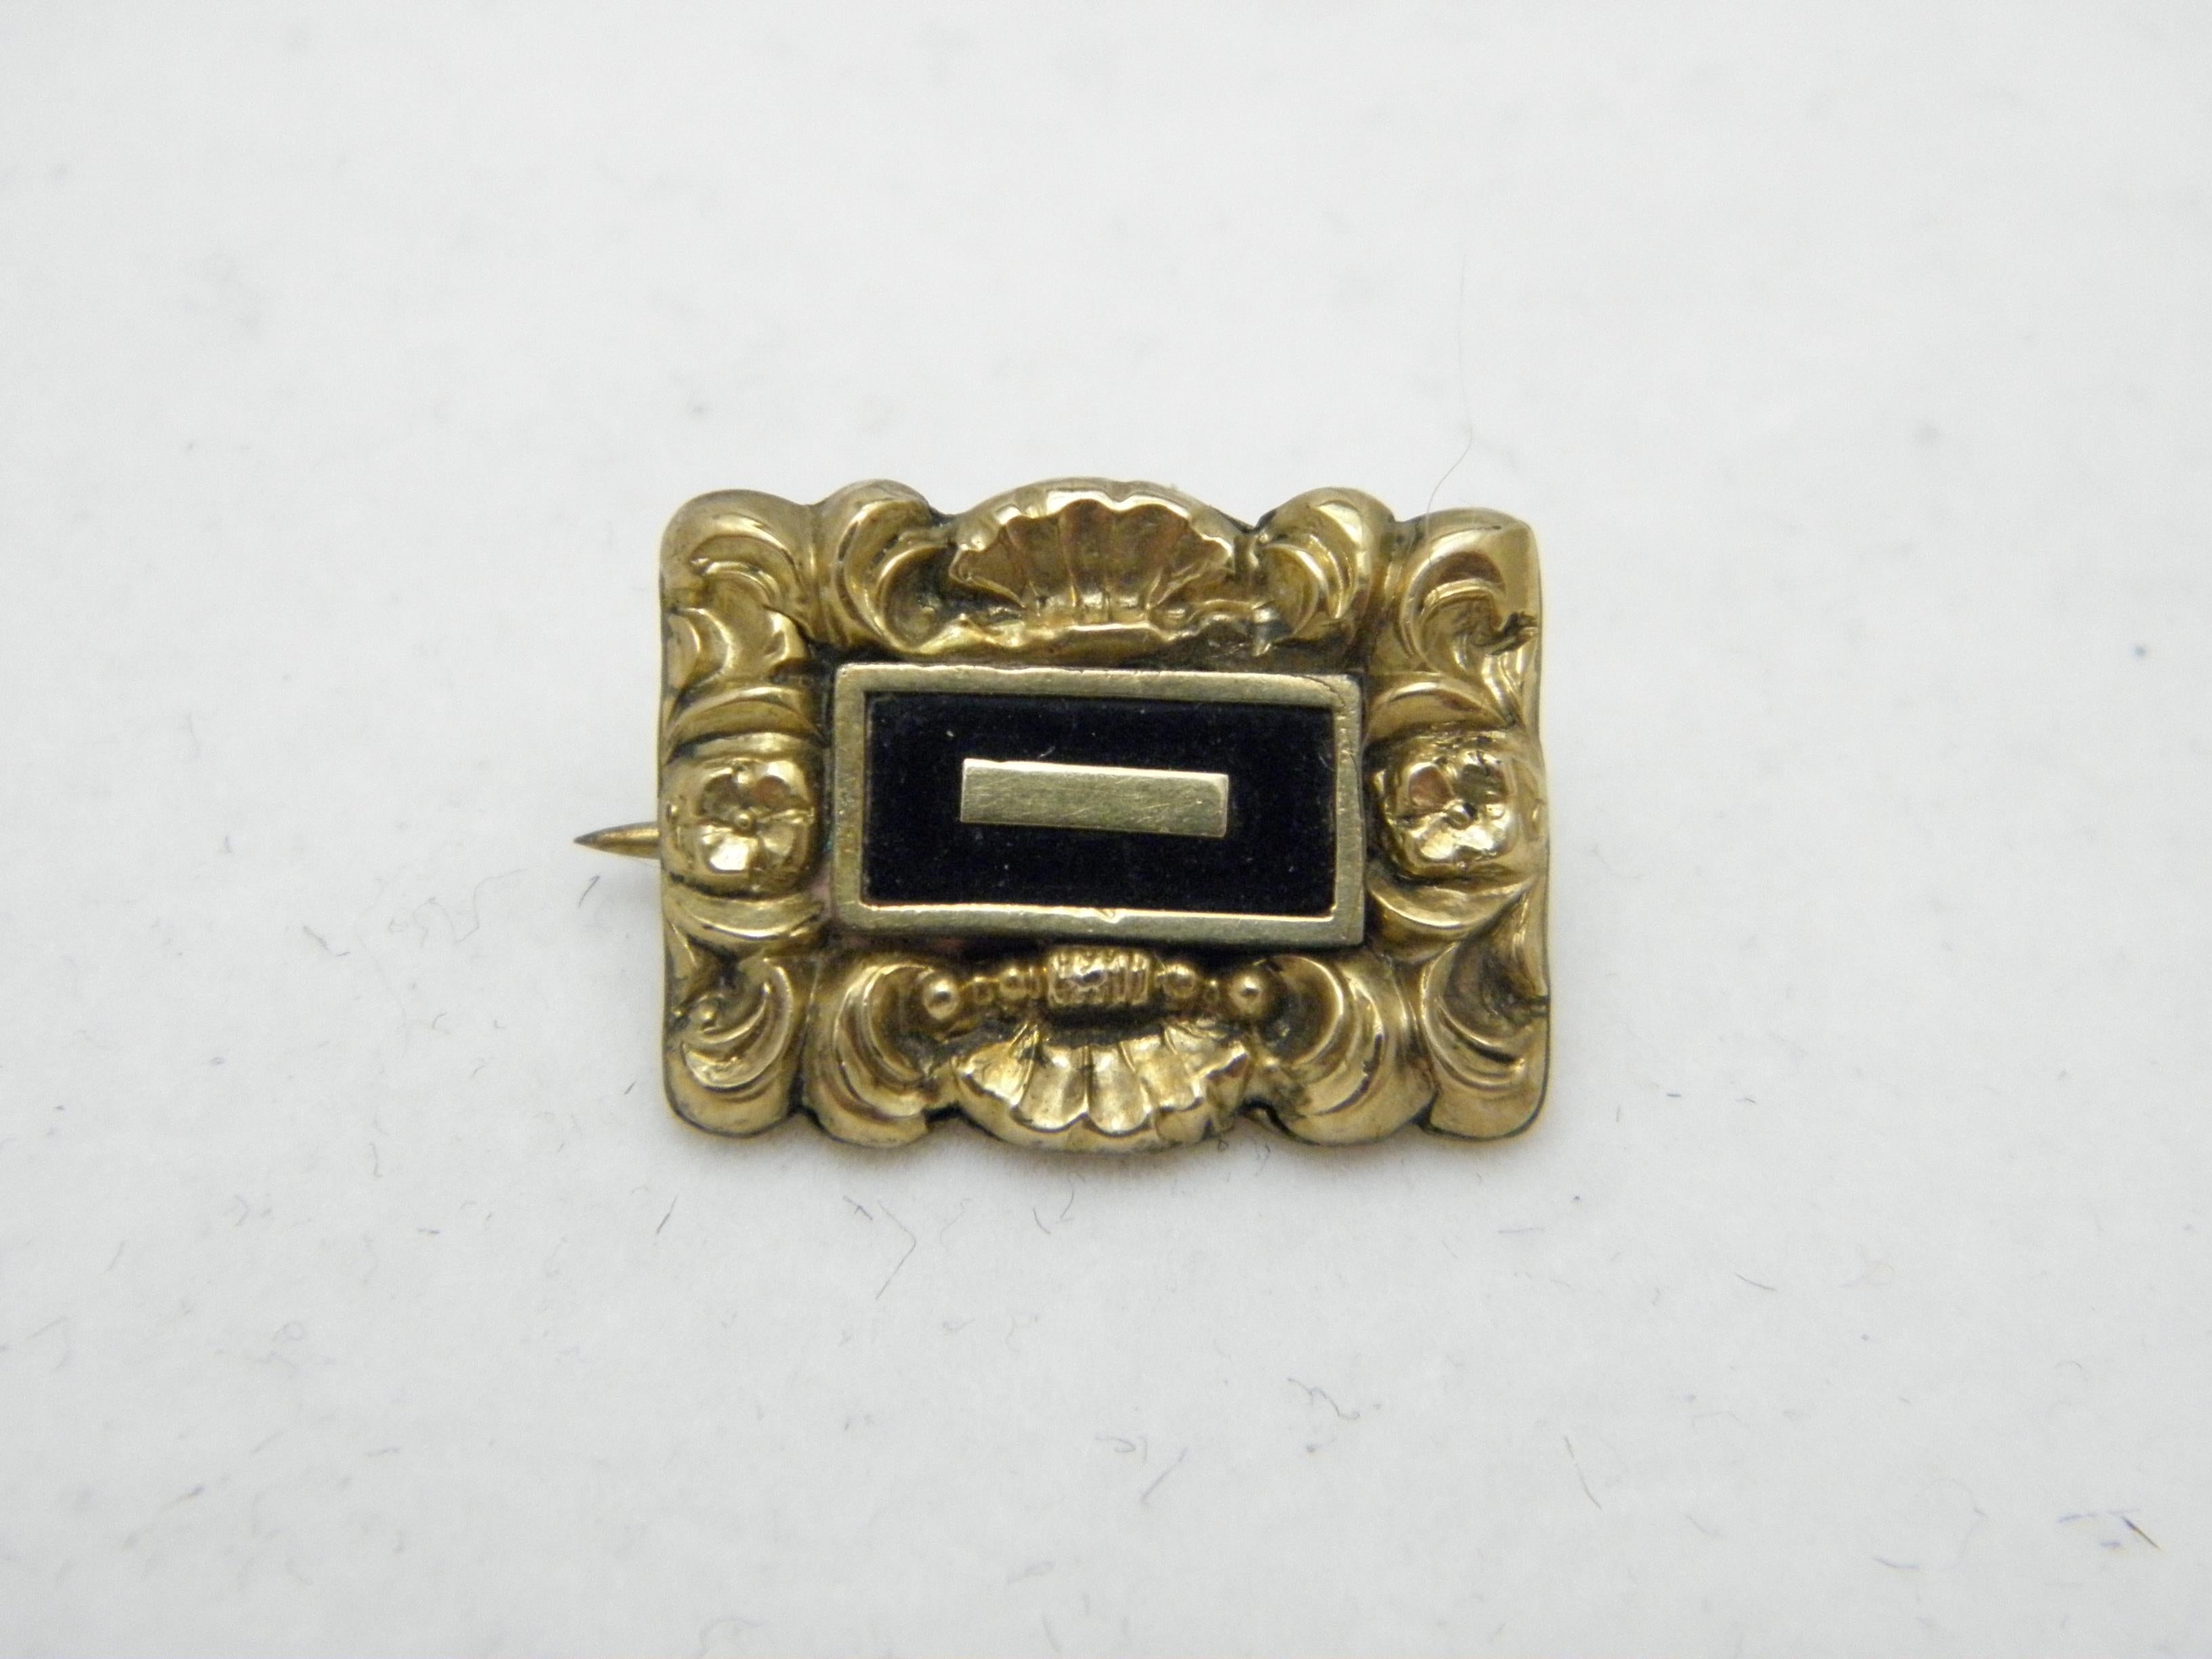 If you have landed on this page then you have an eye for beauty.

On offer is this gorgeous

18CT SOLID GOLD BLACK ENAMELLED MOURNING BROOCH

DETAILS
Material: 18ct (750/000) Solid Yellow Gold
Style: Art Nouveau style detailed decoration with black